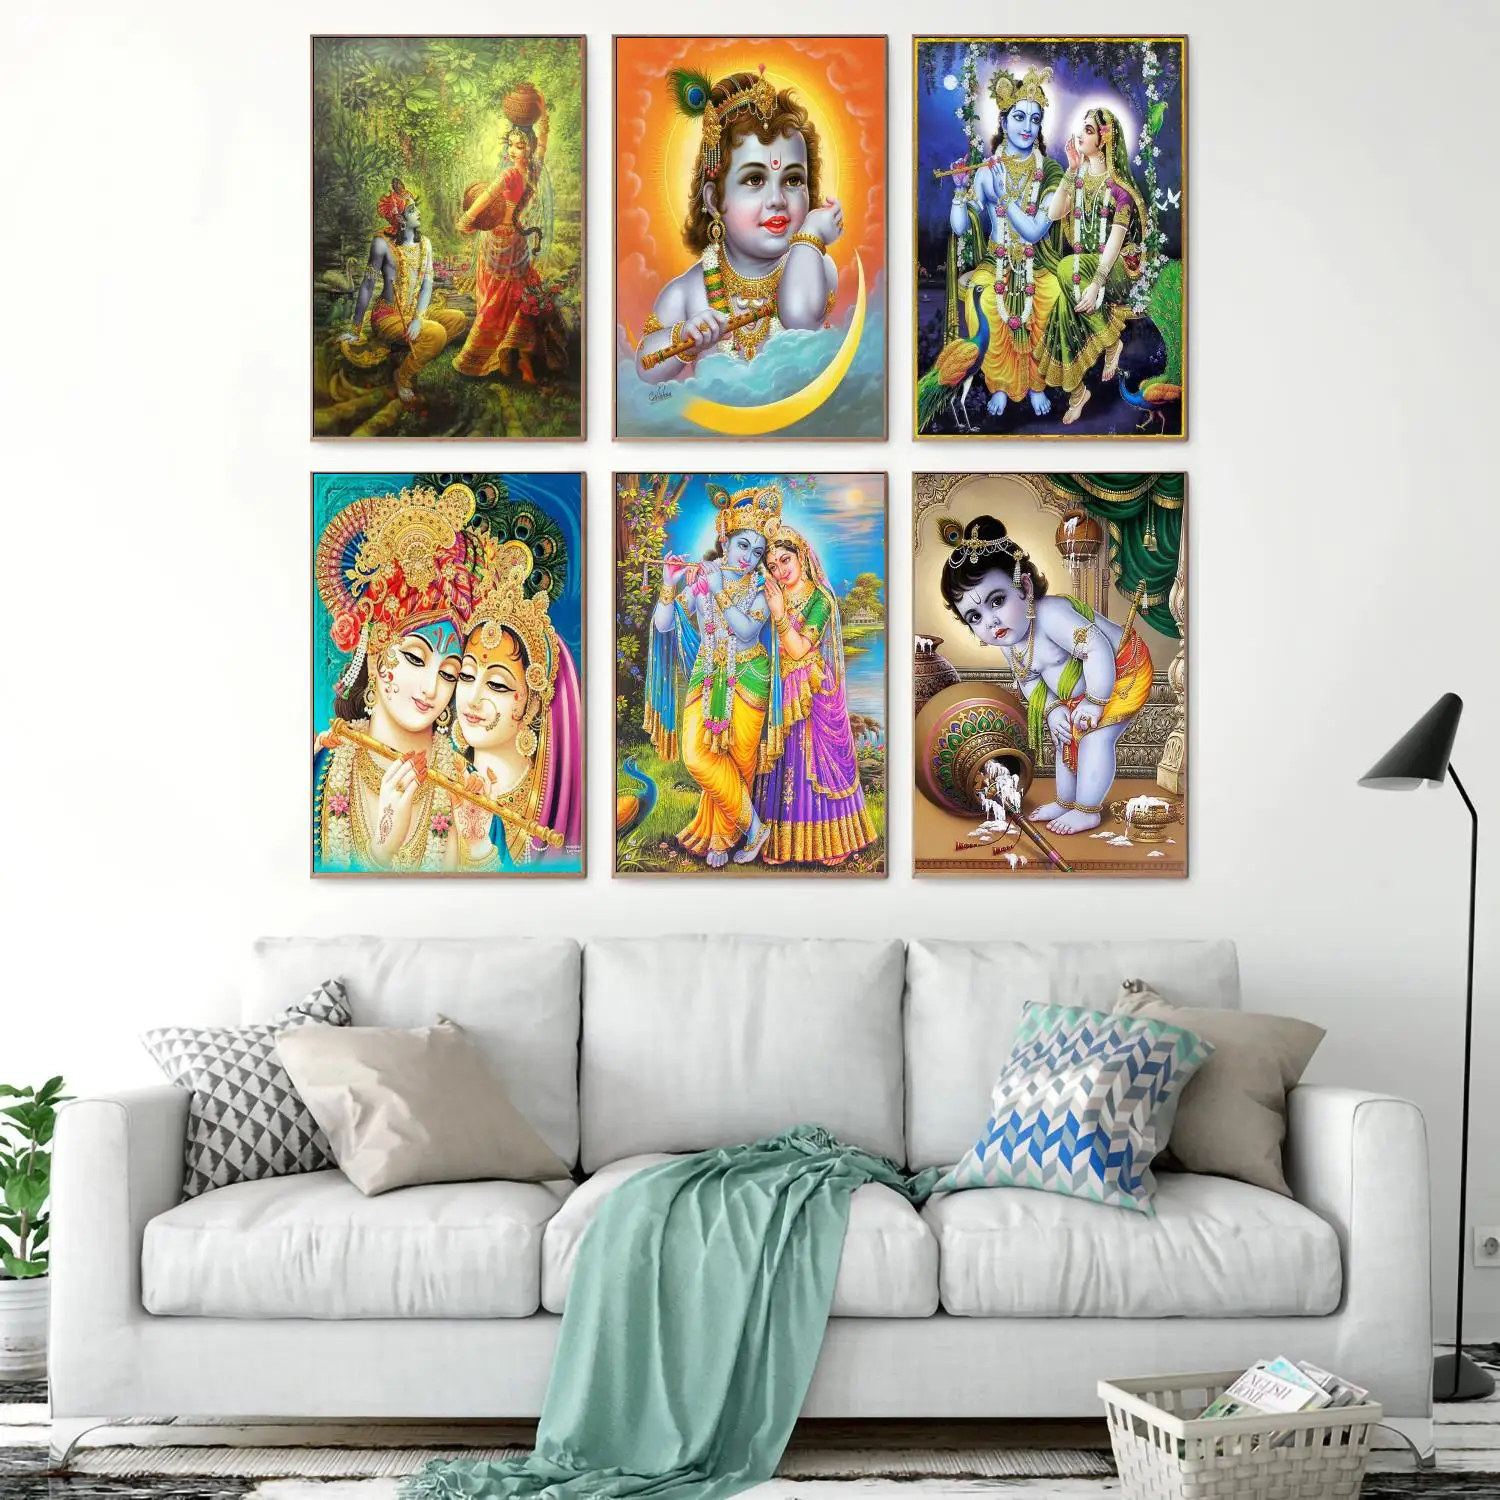 krishna faith Decoration Art Poster Wall Art Personalized Gift Modern  Family bedroom Decor 24x36 Canvas Posters